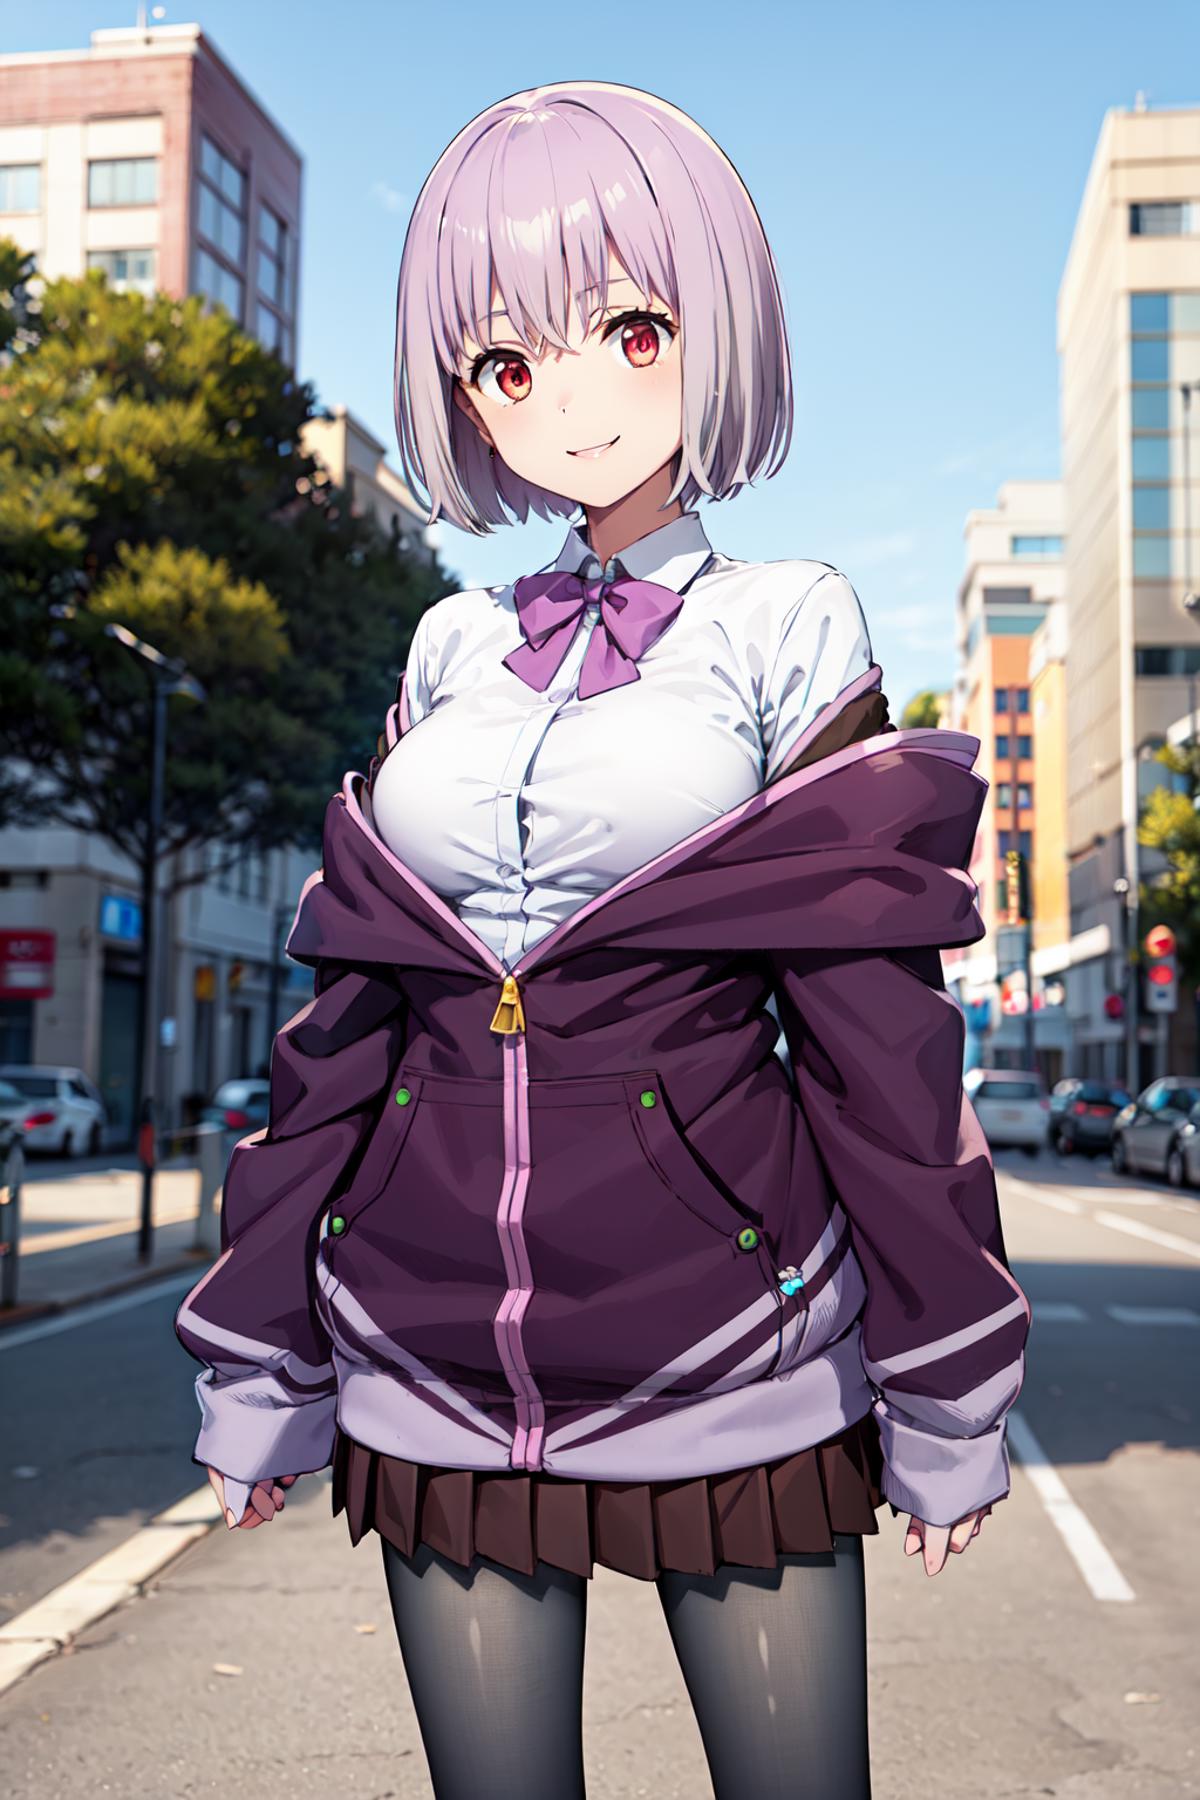 A cartoon character with anime-like features, wearing a blue and purple jacket, posing on a city street.